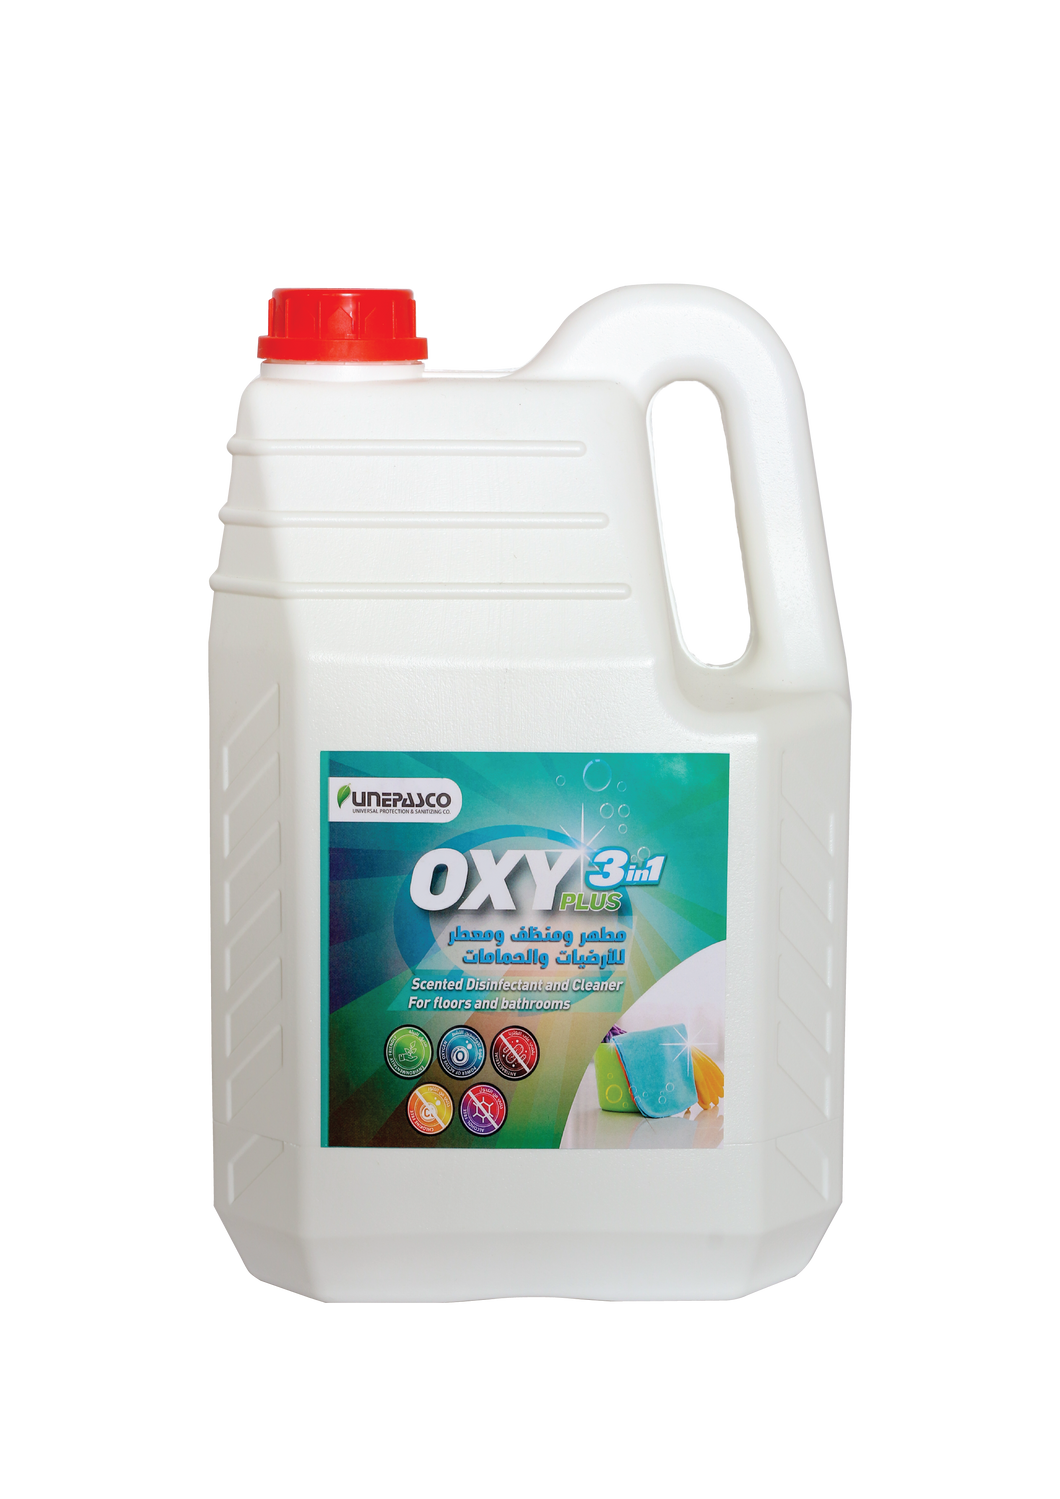 OxyPlus 3 in 1 Floors & Bathrooms Disinfectant, Cleanser, and Perfumer 3.7L